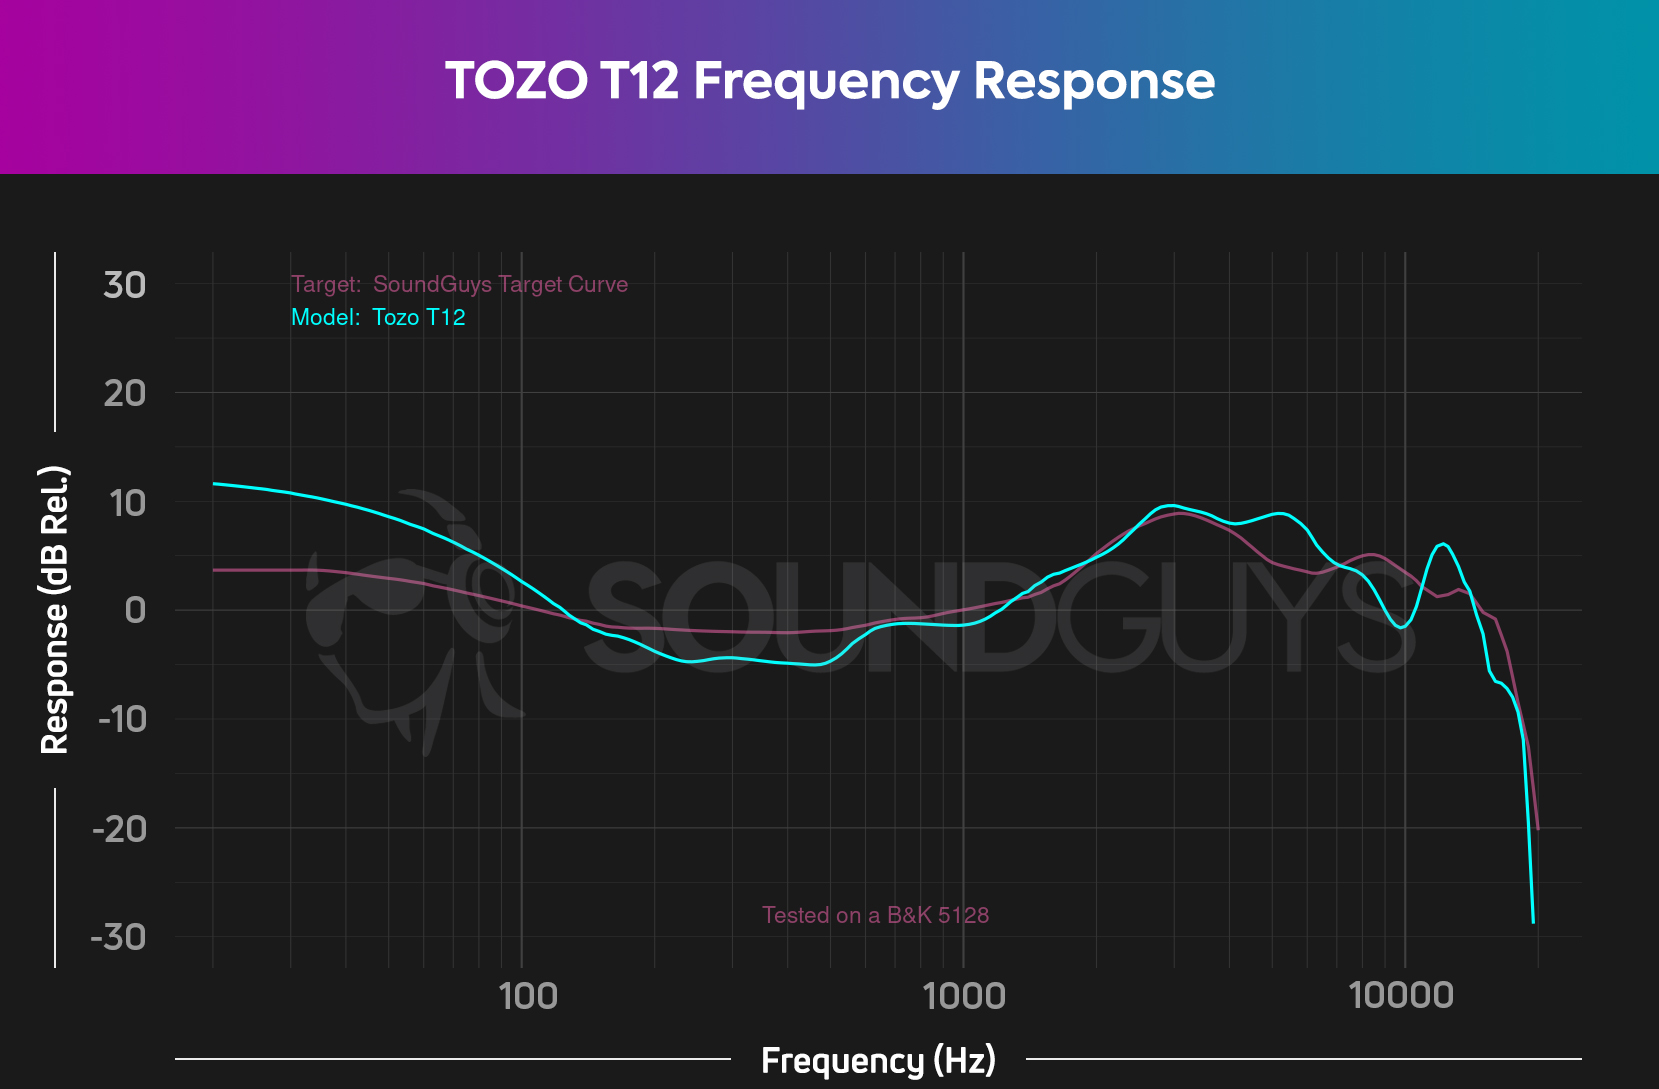 TOZO T12 frequency response chart showing an increase to bass frequencies below 100Hz